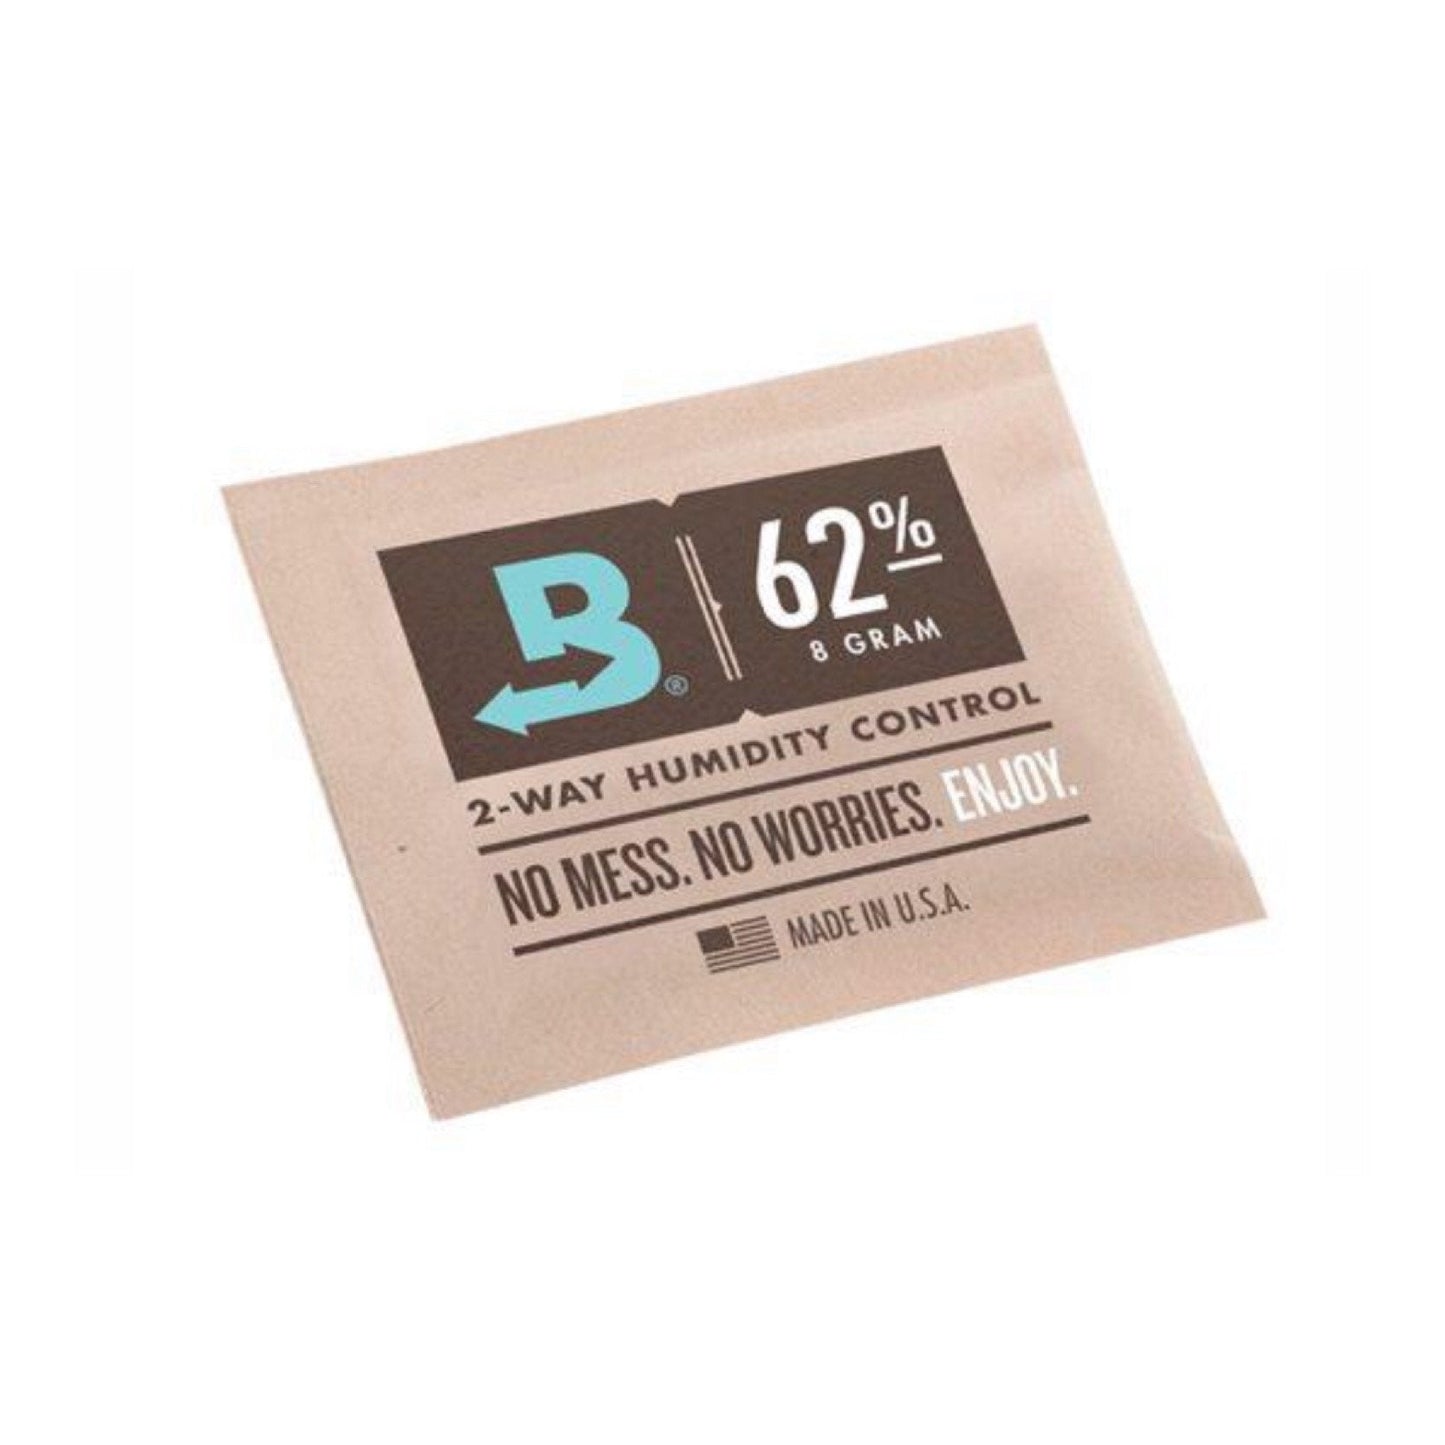 Boveda 62% 2-Way Relative Humidity Control Packs (Size 8) by Boveda Inc. | Mission Dispensary